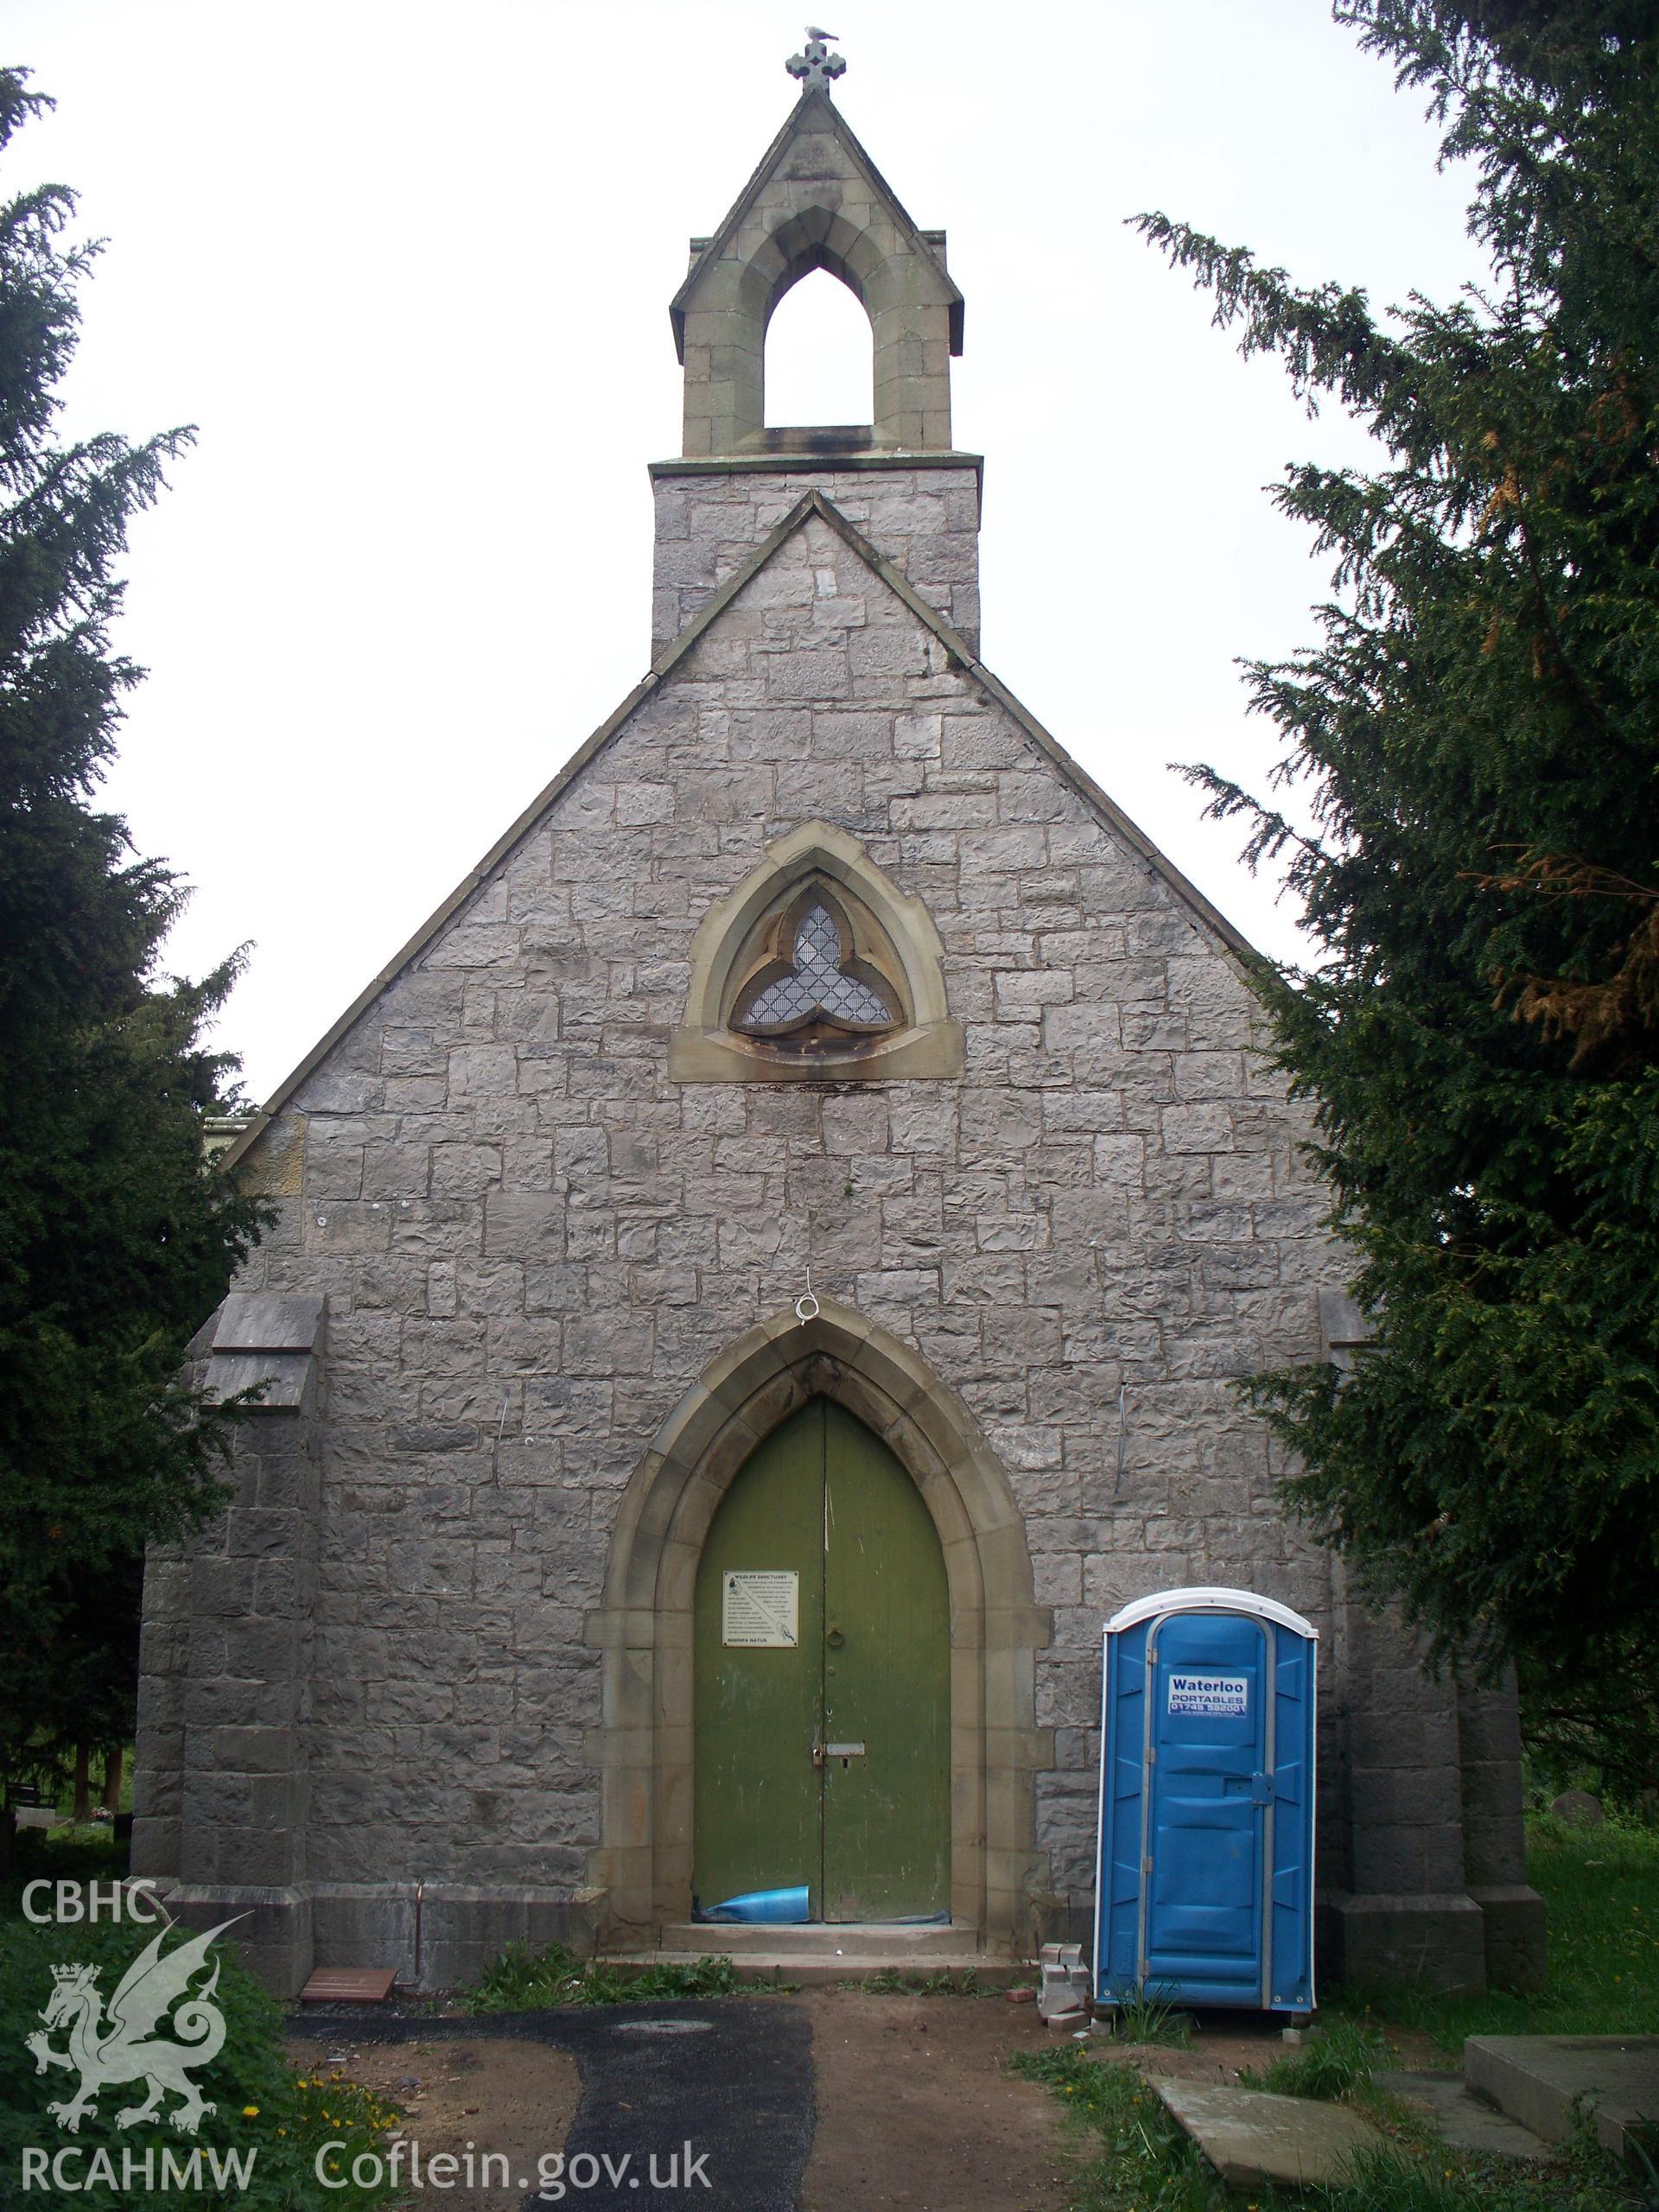 RCAHMW digital photograph of Mortuary Chapel, St Asaph; by Stephen Hughes taken on 30/04/2009.